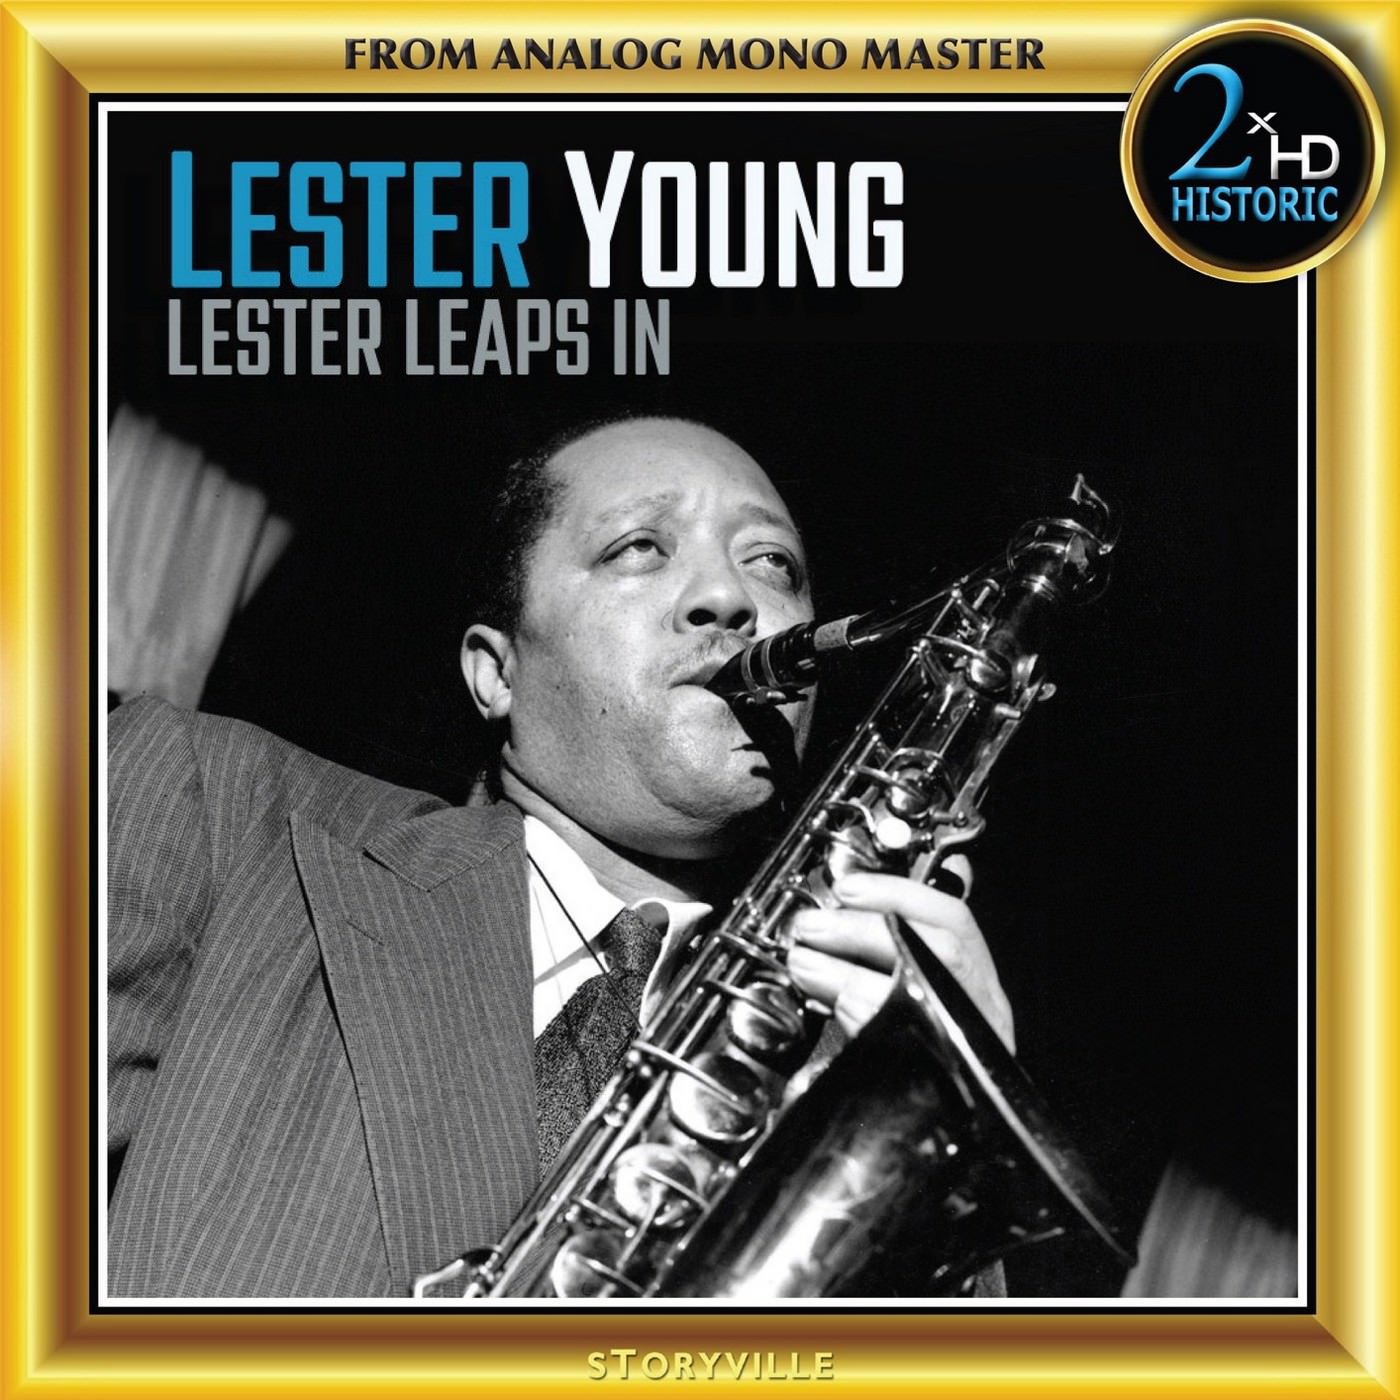 Lester Young - Lester Leaps In (Remastered) (2018) [FLAC 24bit/192kHz]